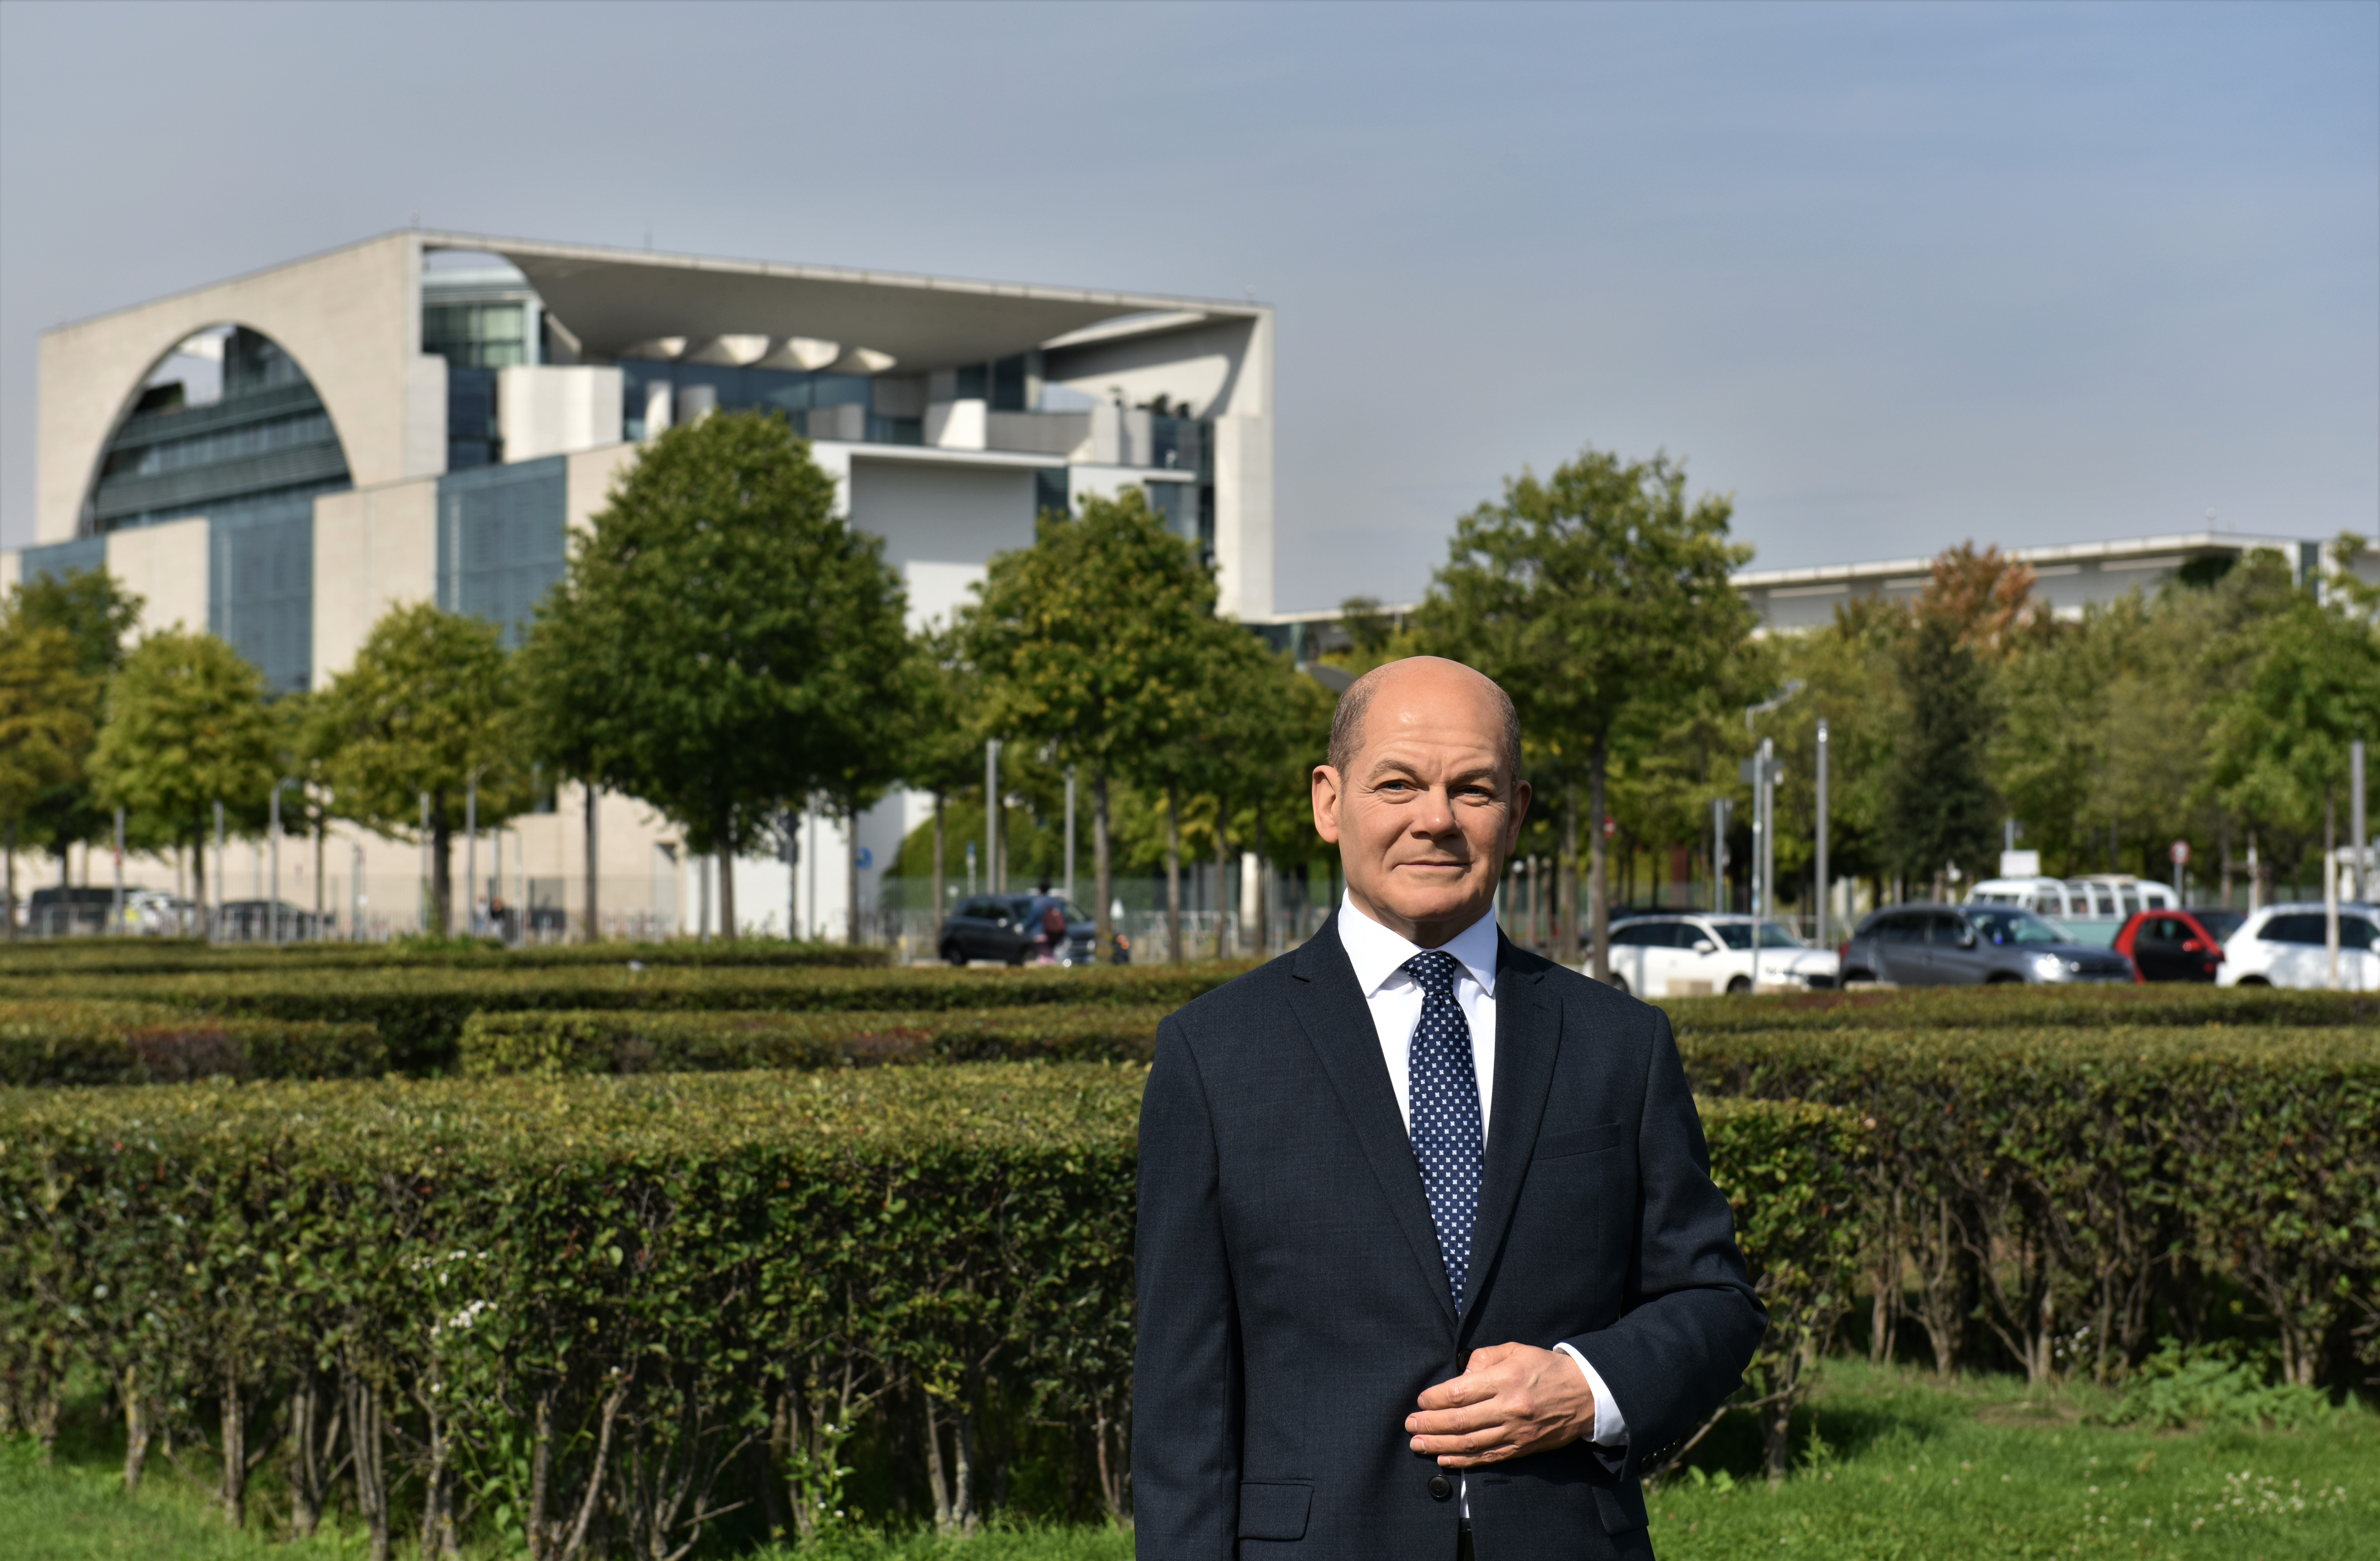 The wax figure of German Chancellor Olaf Scholz in front of the Chancellery shortly before moving into Madame Tussauds Berlin.